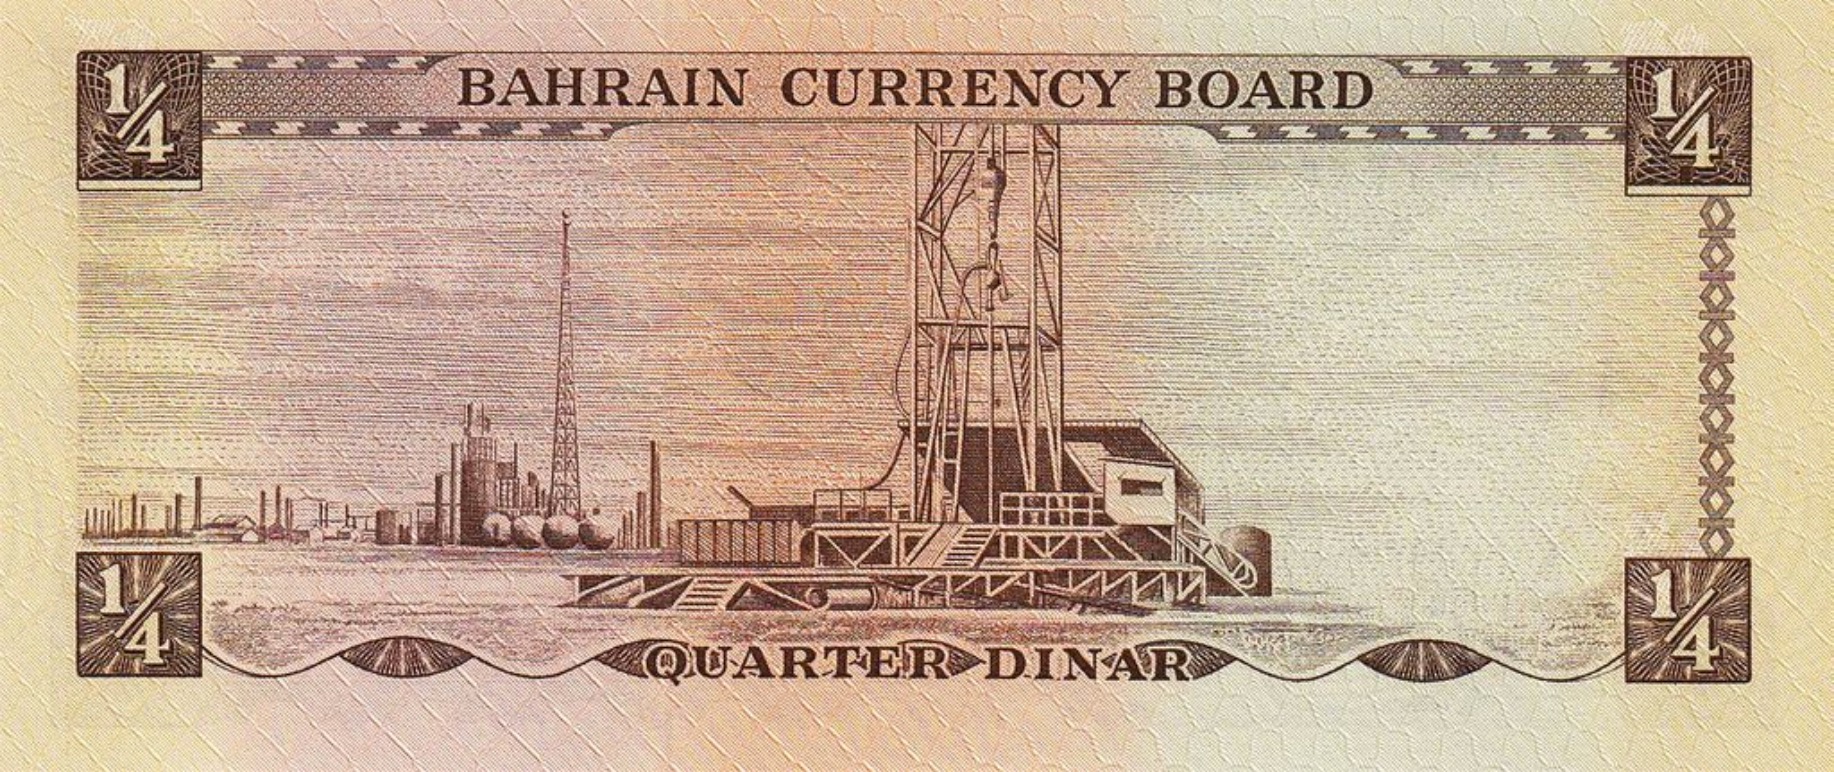 Bahrain Currency Board 1/4 Dinar banknote (First Issue)